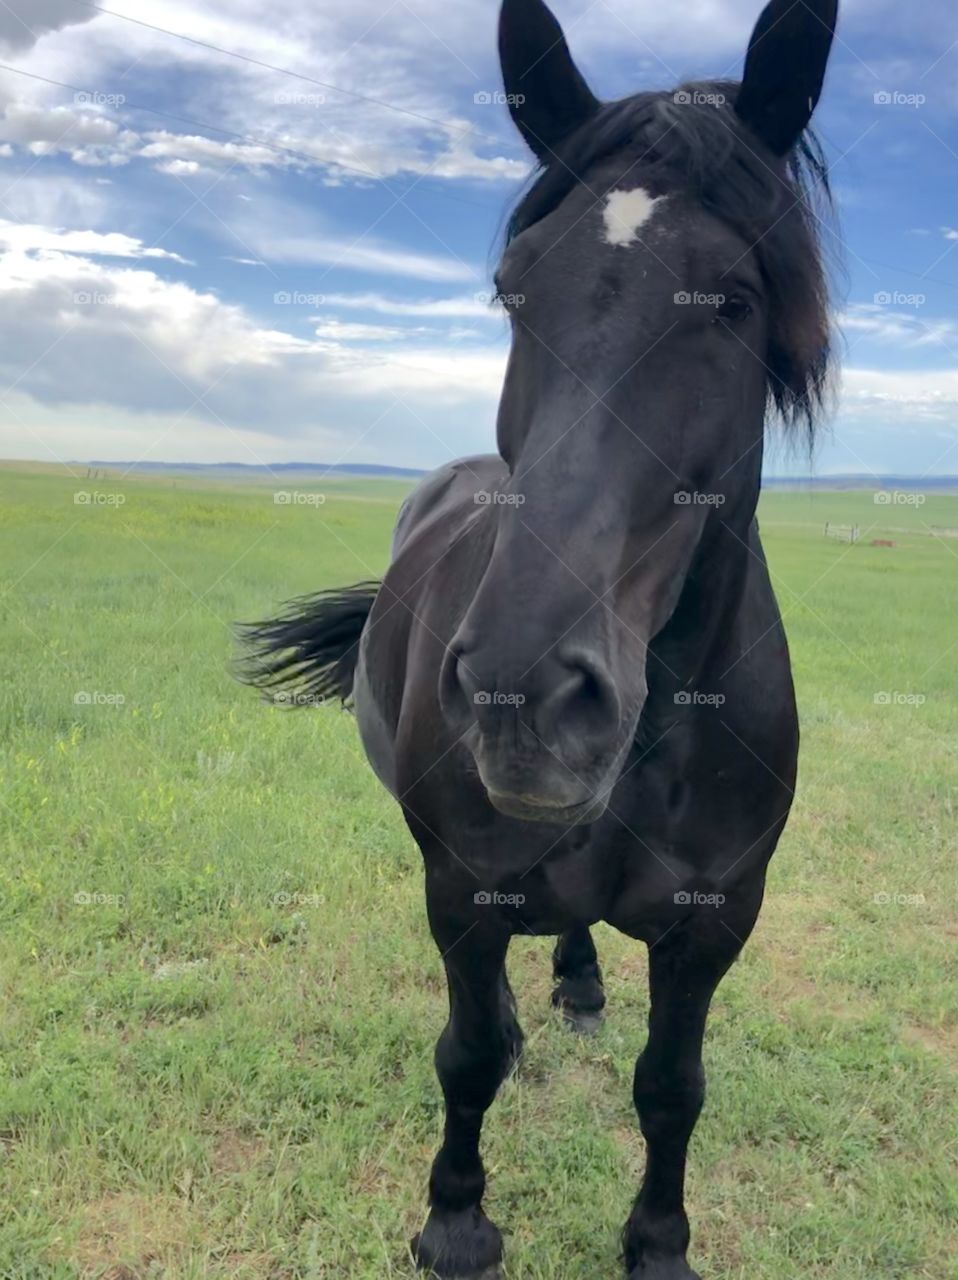 Big, beautiful Percheron horse in rural Montana. This amazing boy is a part of a 4 horse team, pulling wagons at parades and in competitions around the northwest. Living proof that the traditions of the west are still alive. 